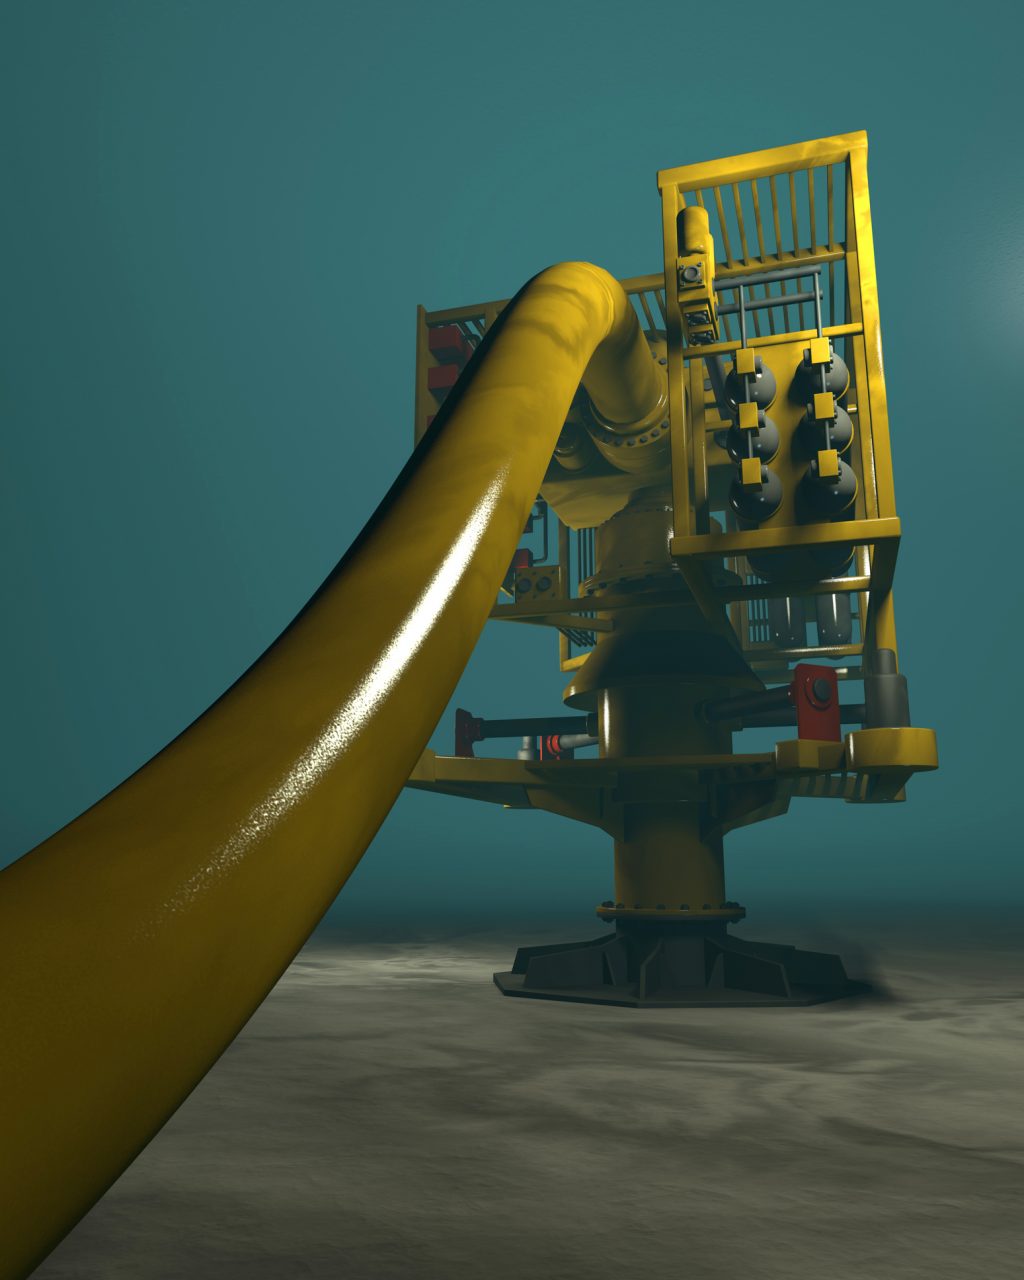 Large Underwater Oil and Gas Wellhead